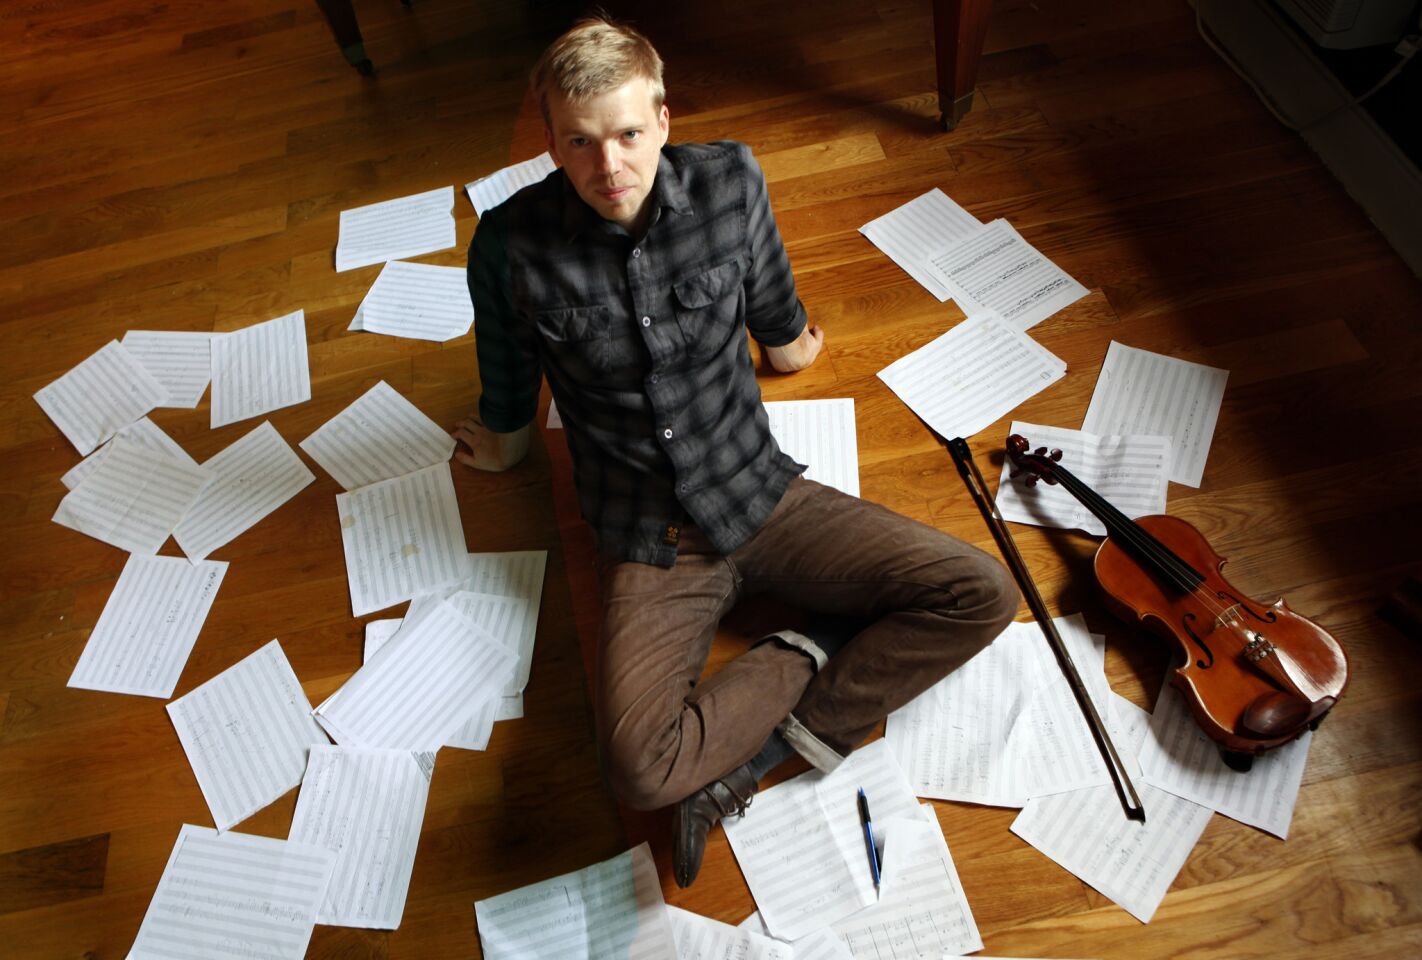 Andrew Norman is the Los Angeles Chamber Orchestra's new composer-in-residence. Norman, 32, often does his composing on the floor. He was raised in central California and now lives in Brooklyn. He has worked with some of the country's top music organizations. More: Composer Andrew Norman's imagination has taken residence